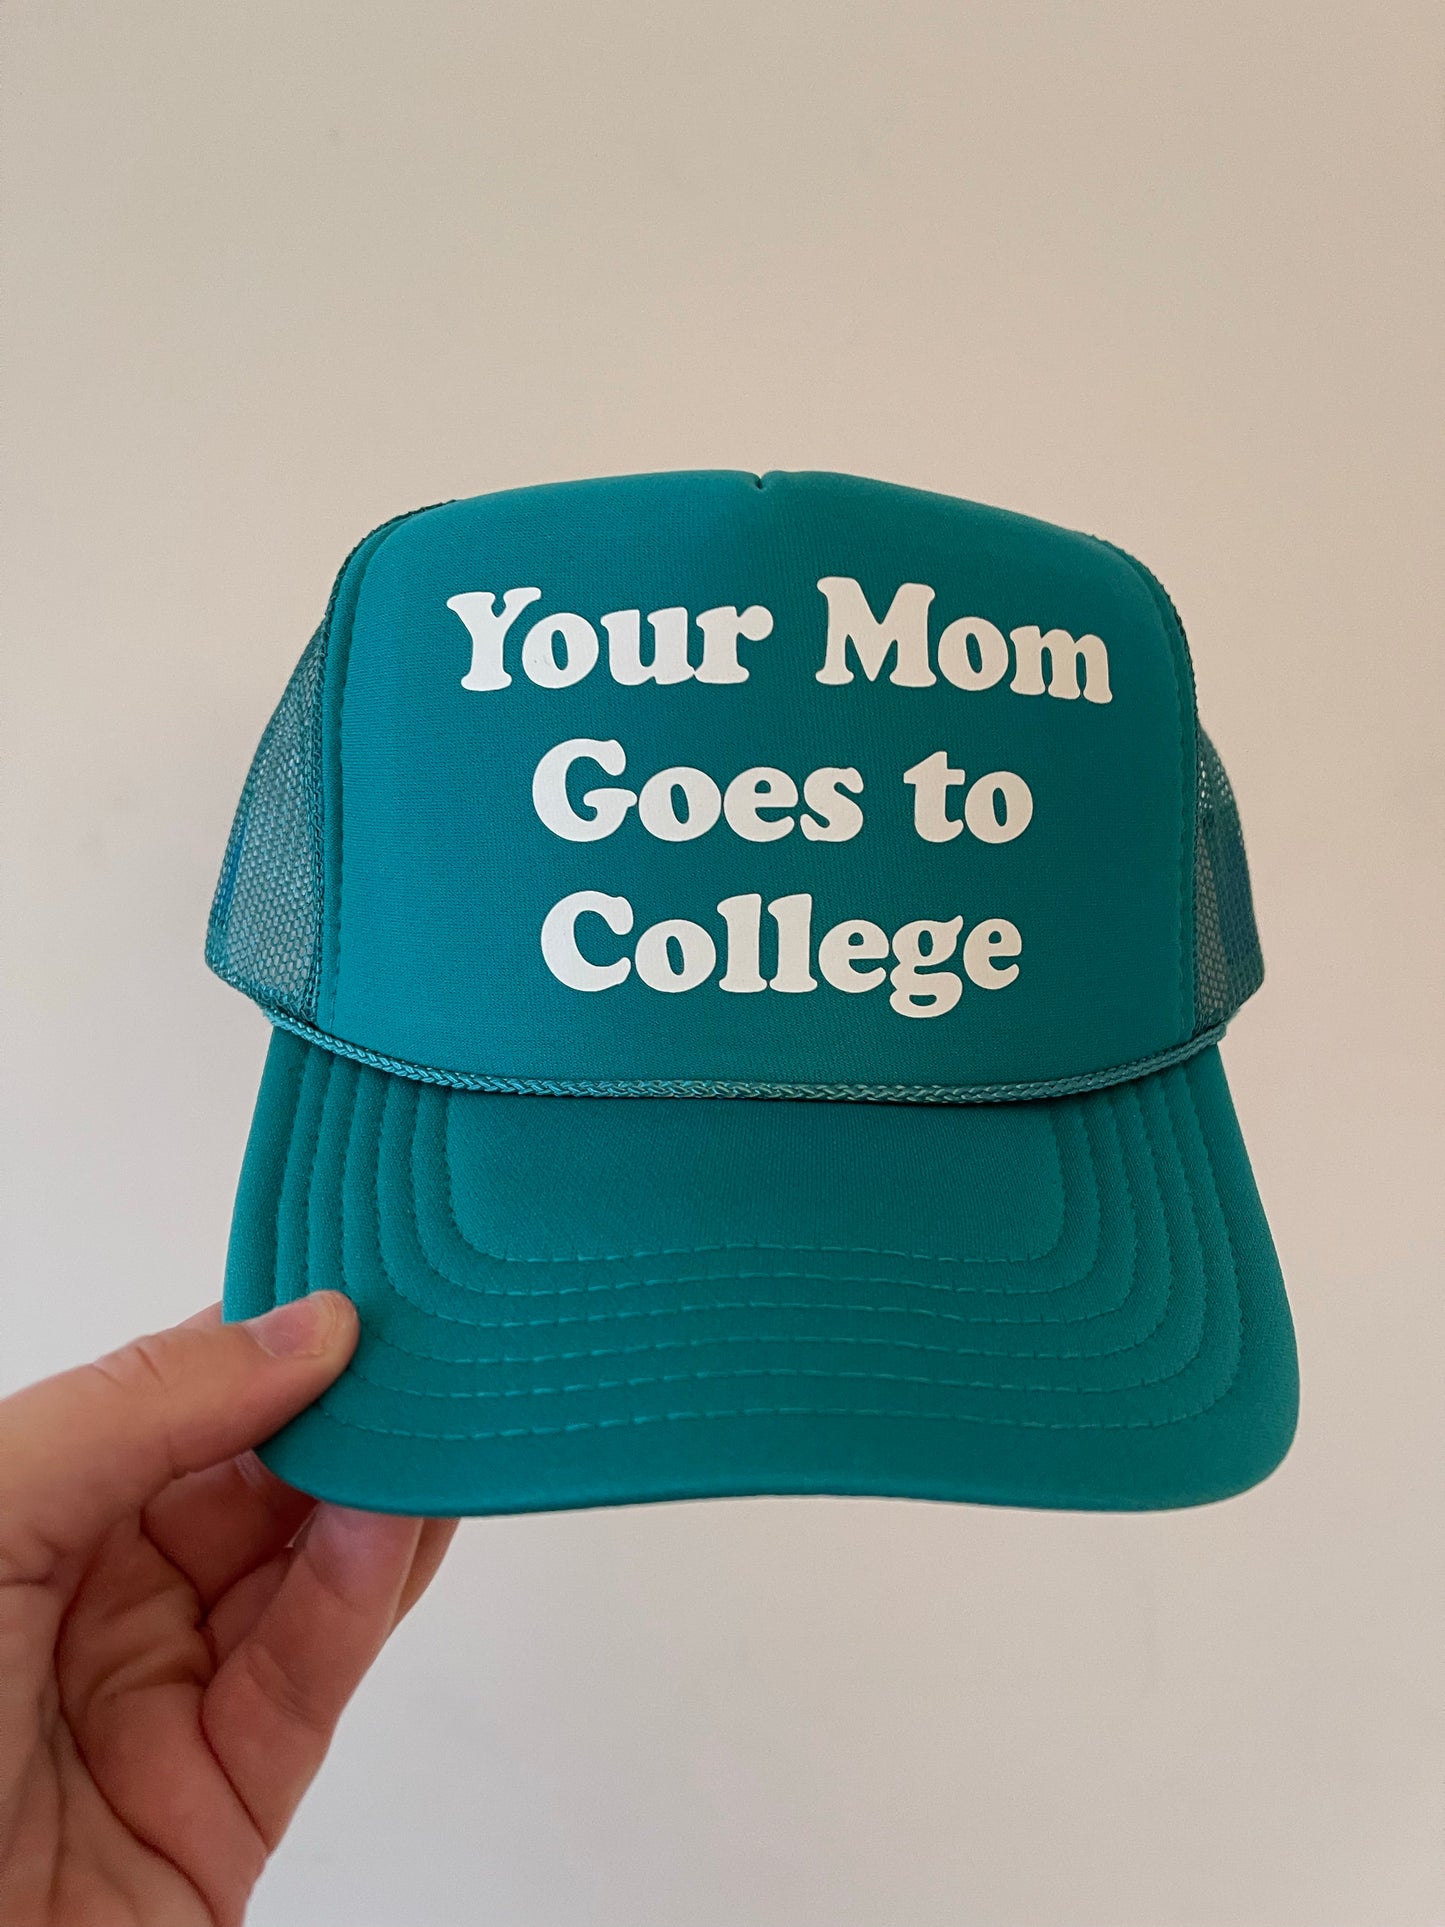 “Your Mom goes to college”